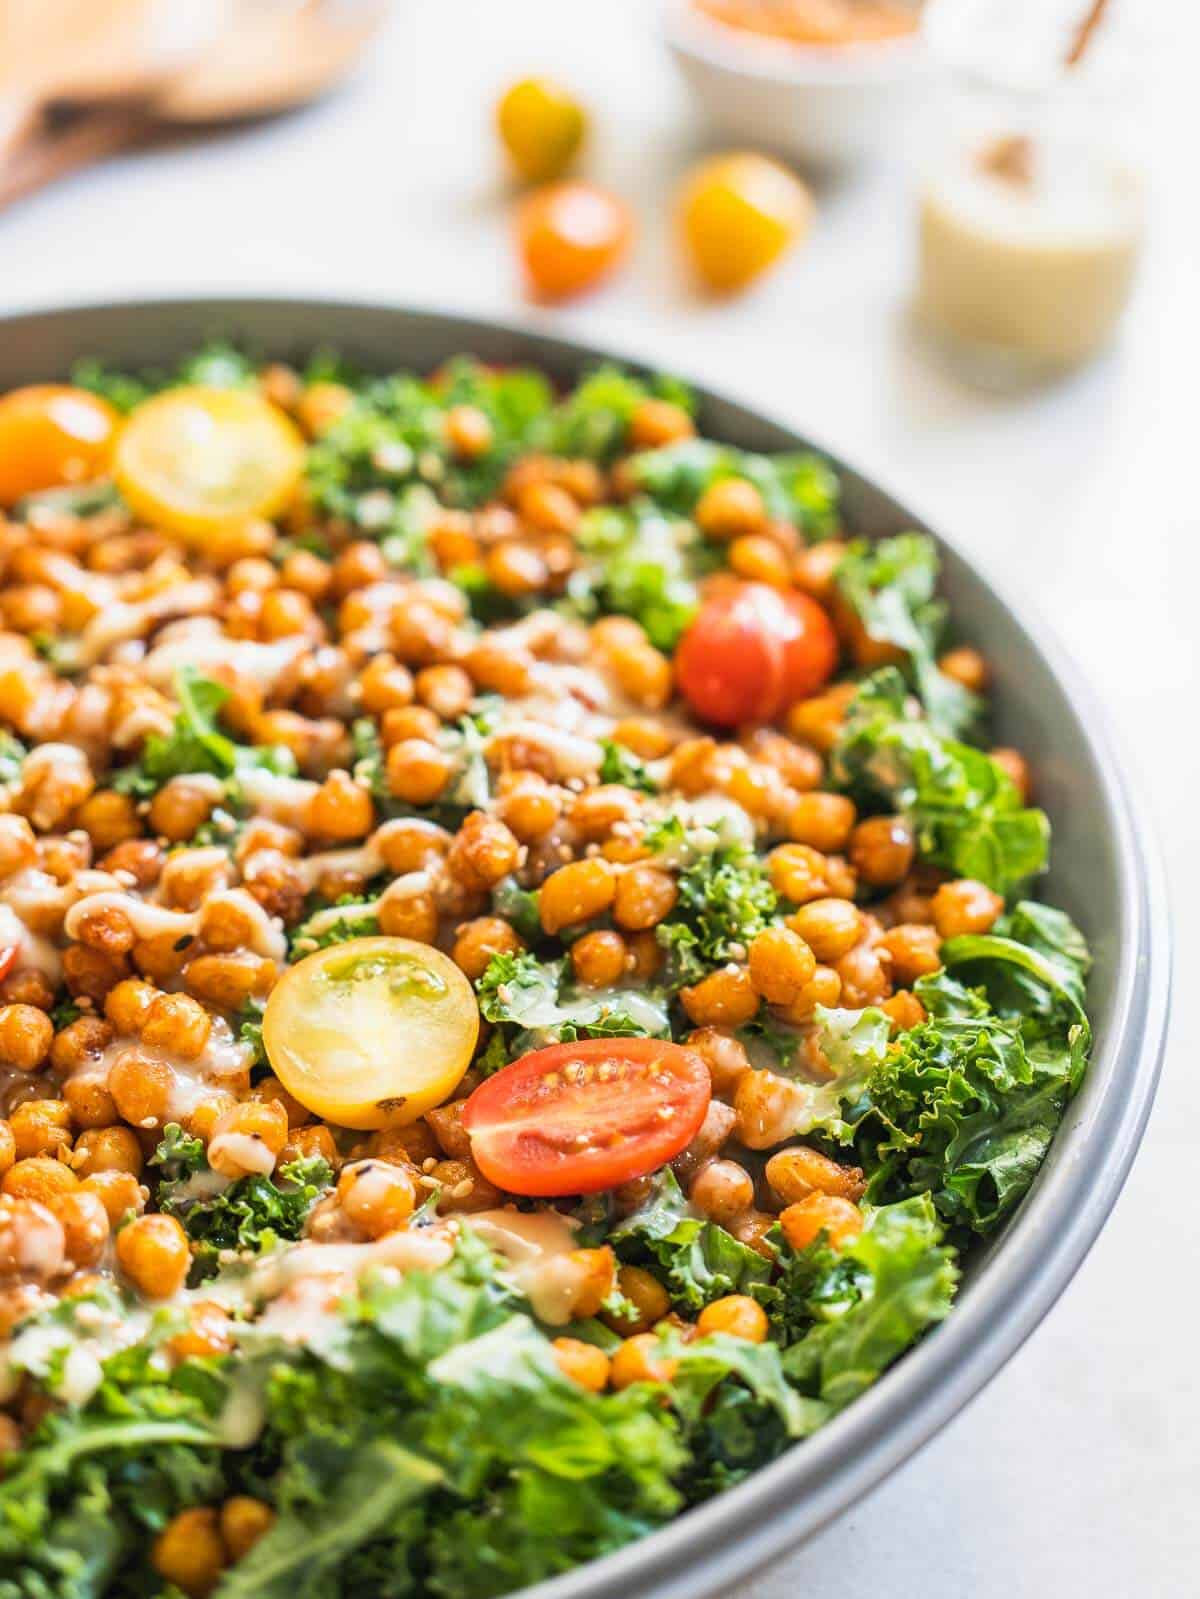 salad served with spicy roasted chickpeas as topping.